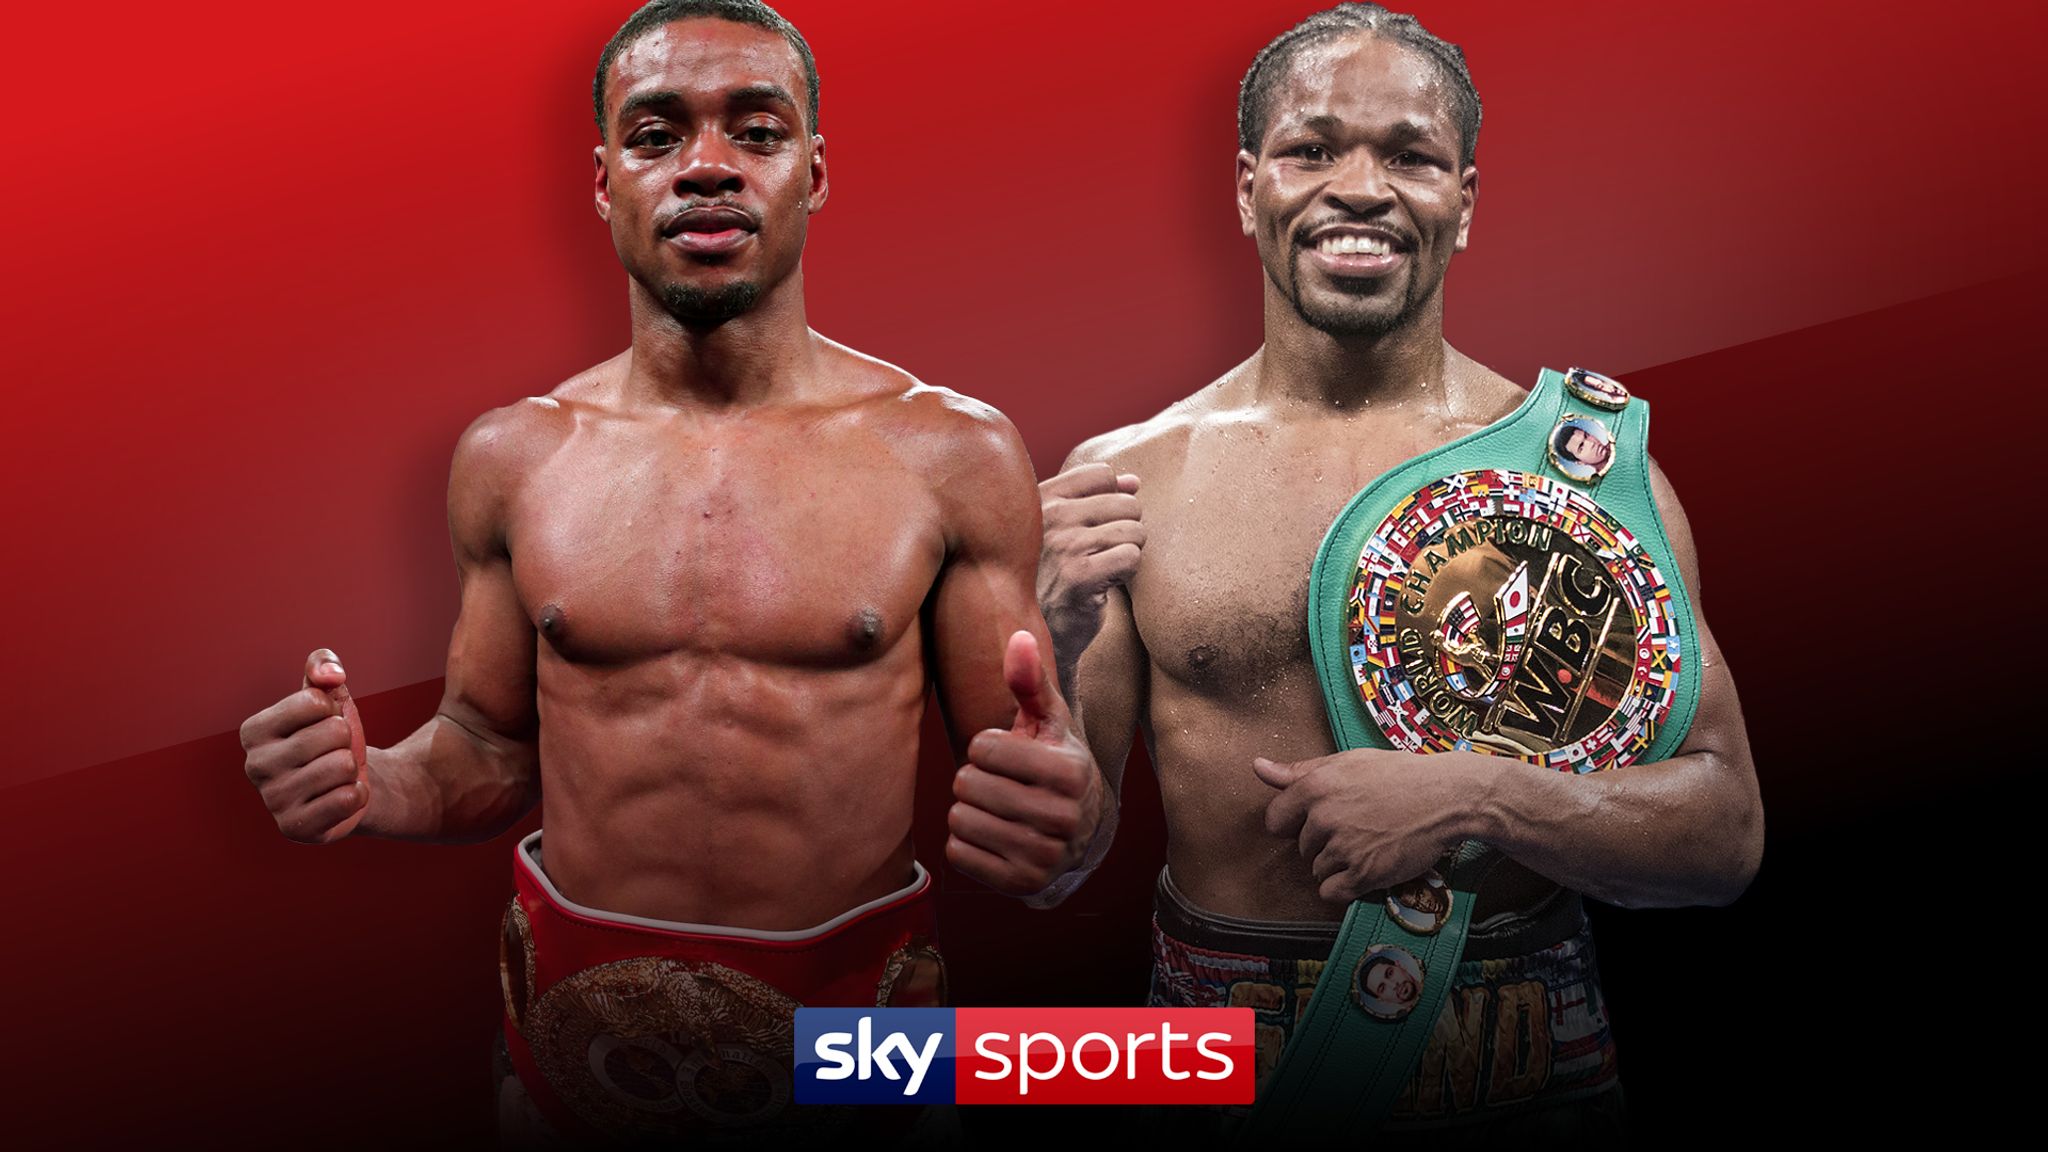 Errol Spence Jr vs Shawn Porter World title unification clash live on Sky Sports presented by Premier Boxing Champions Boxing News Sky Sports